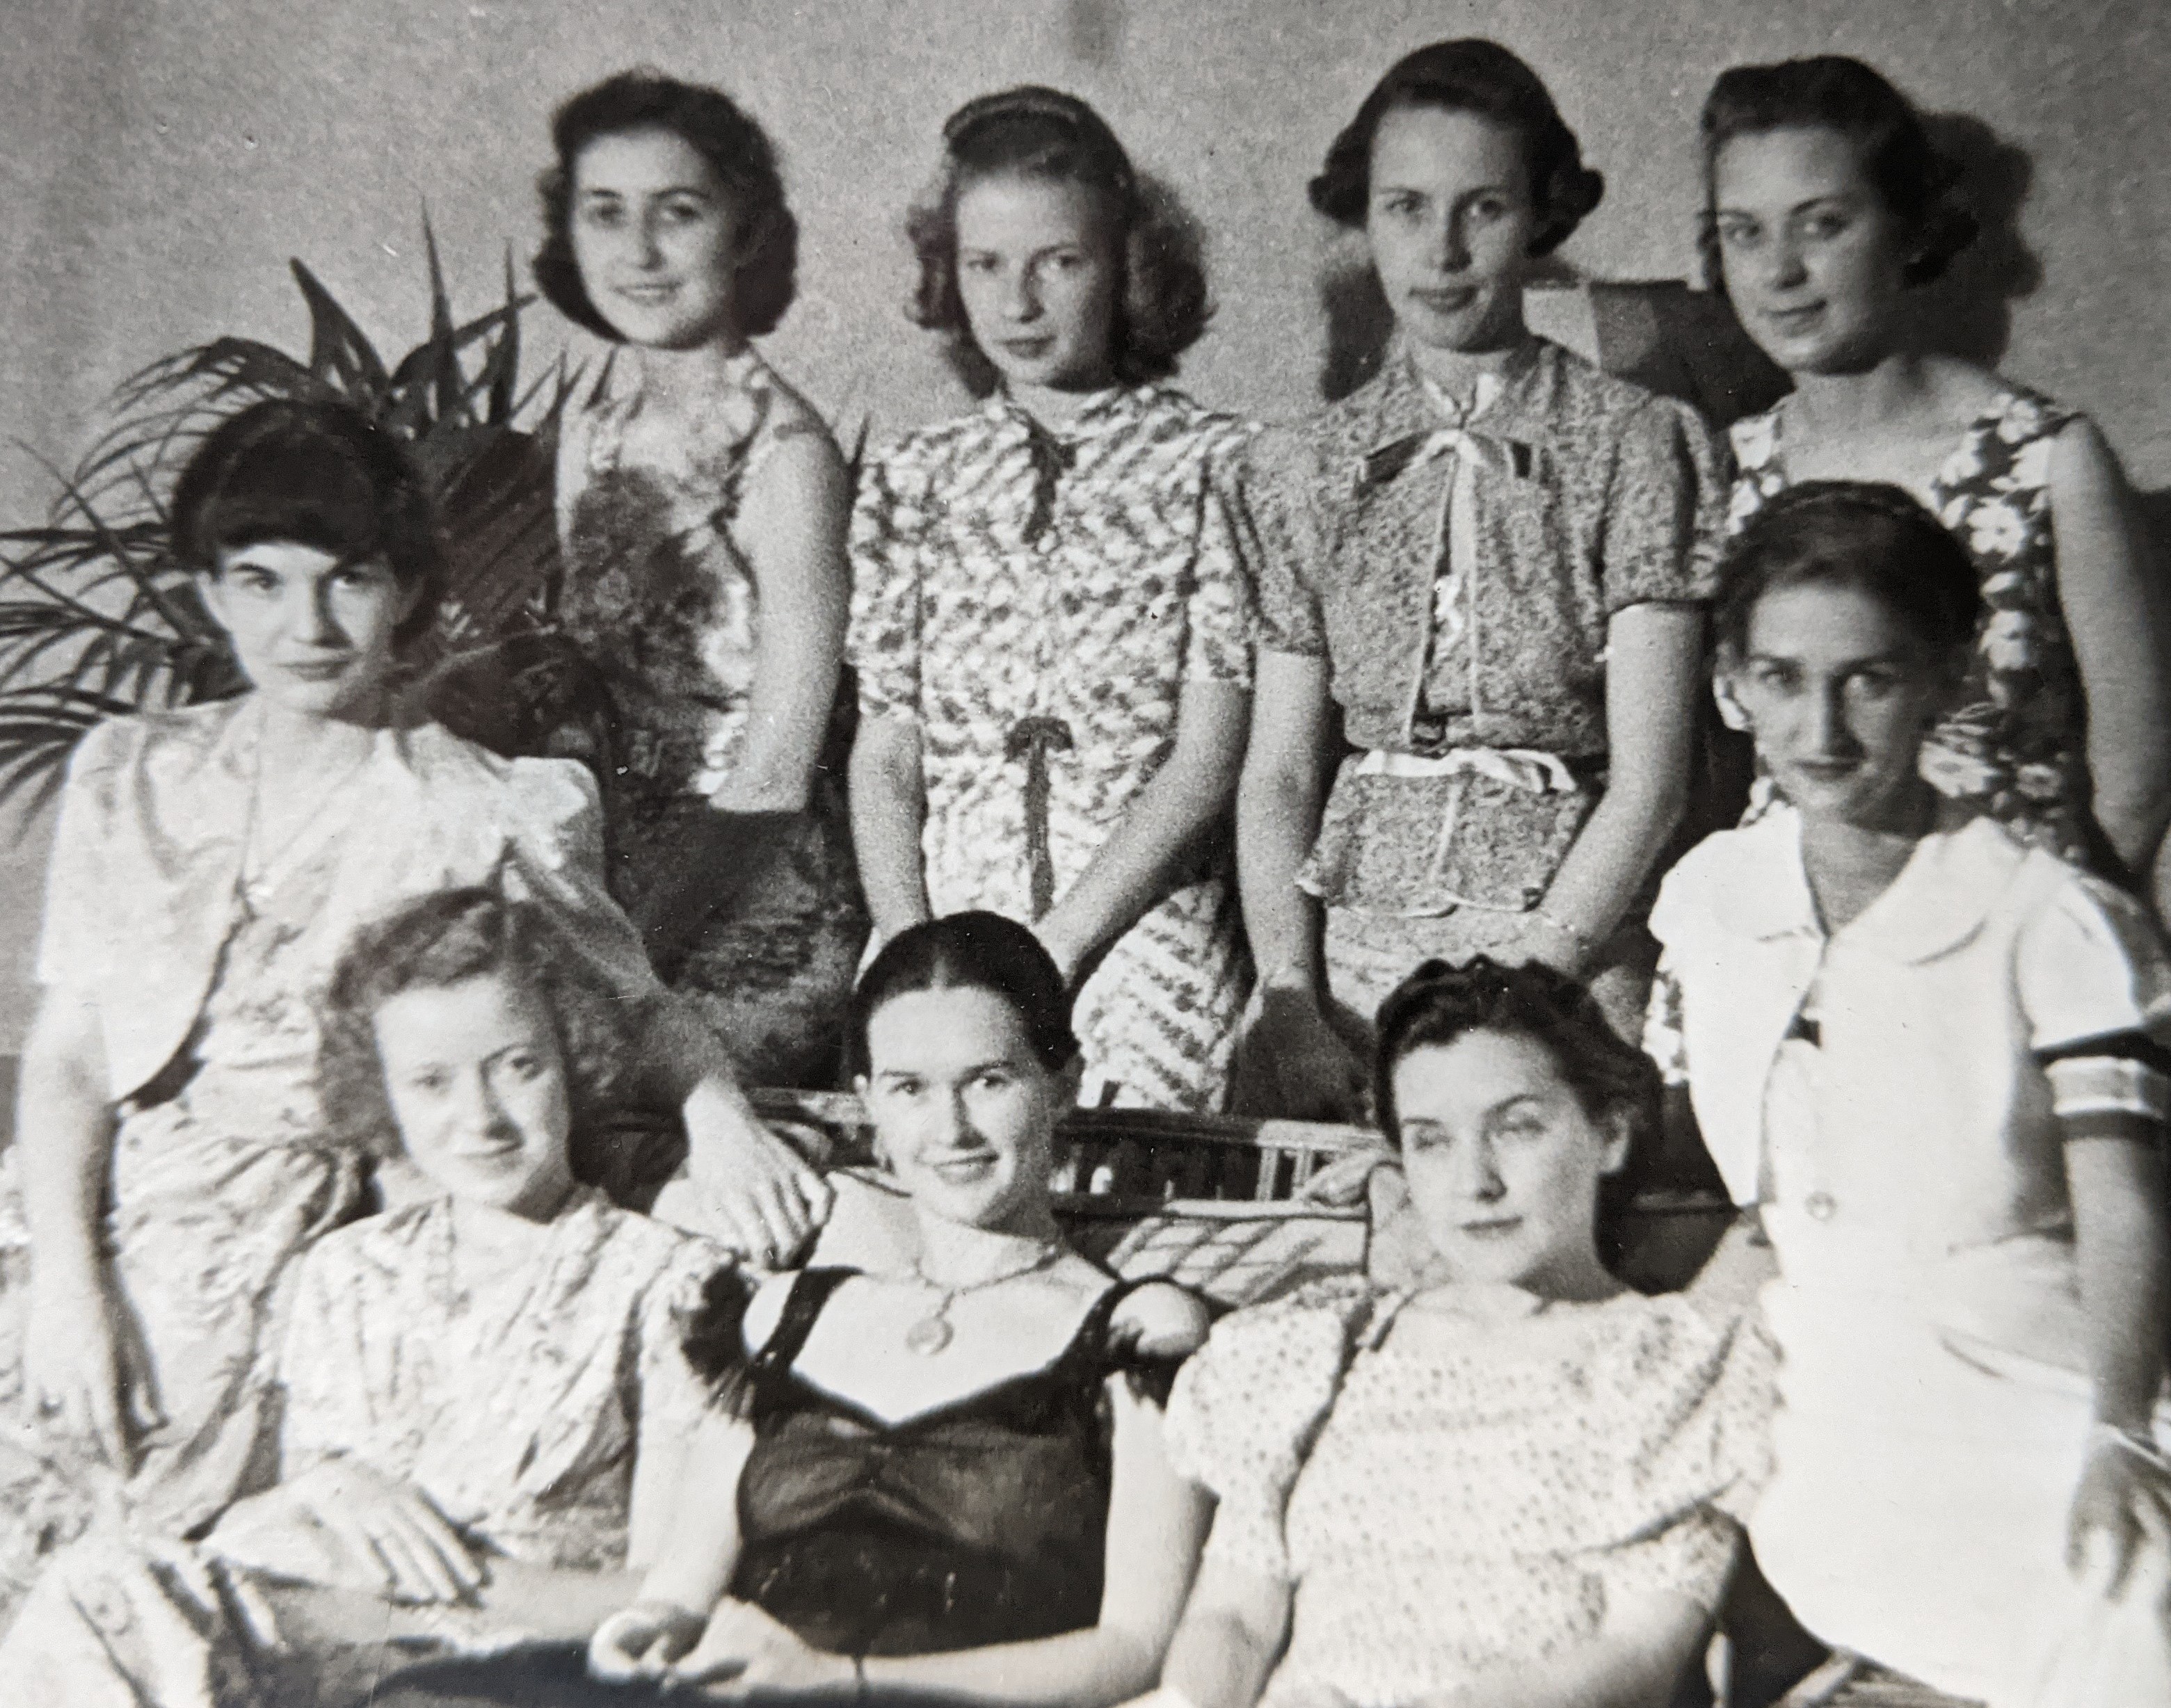 Kitty is pictured, far left, with one of her women's student groups, most likely Chi Omega.